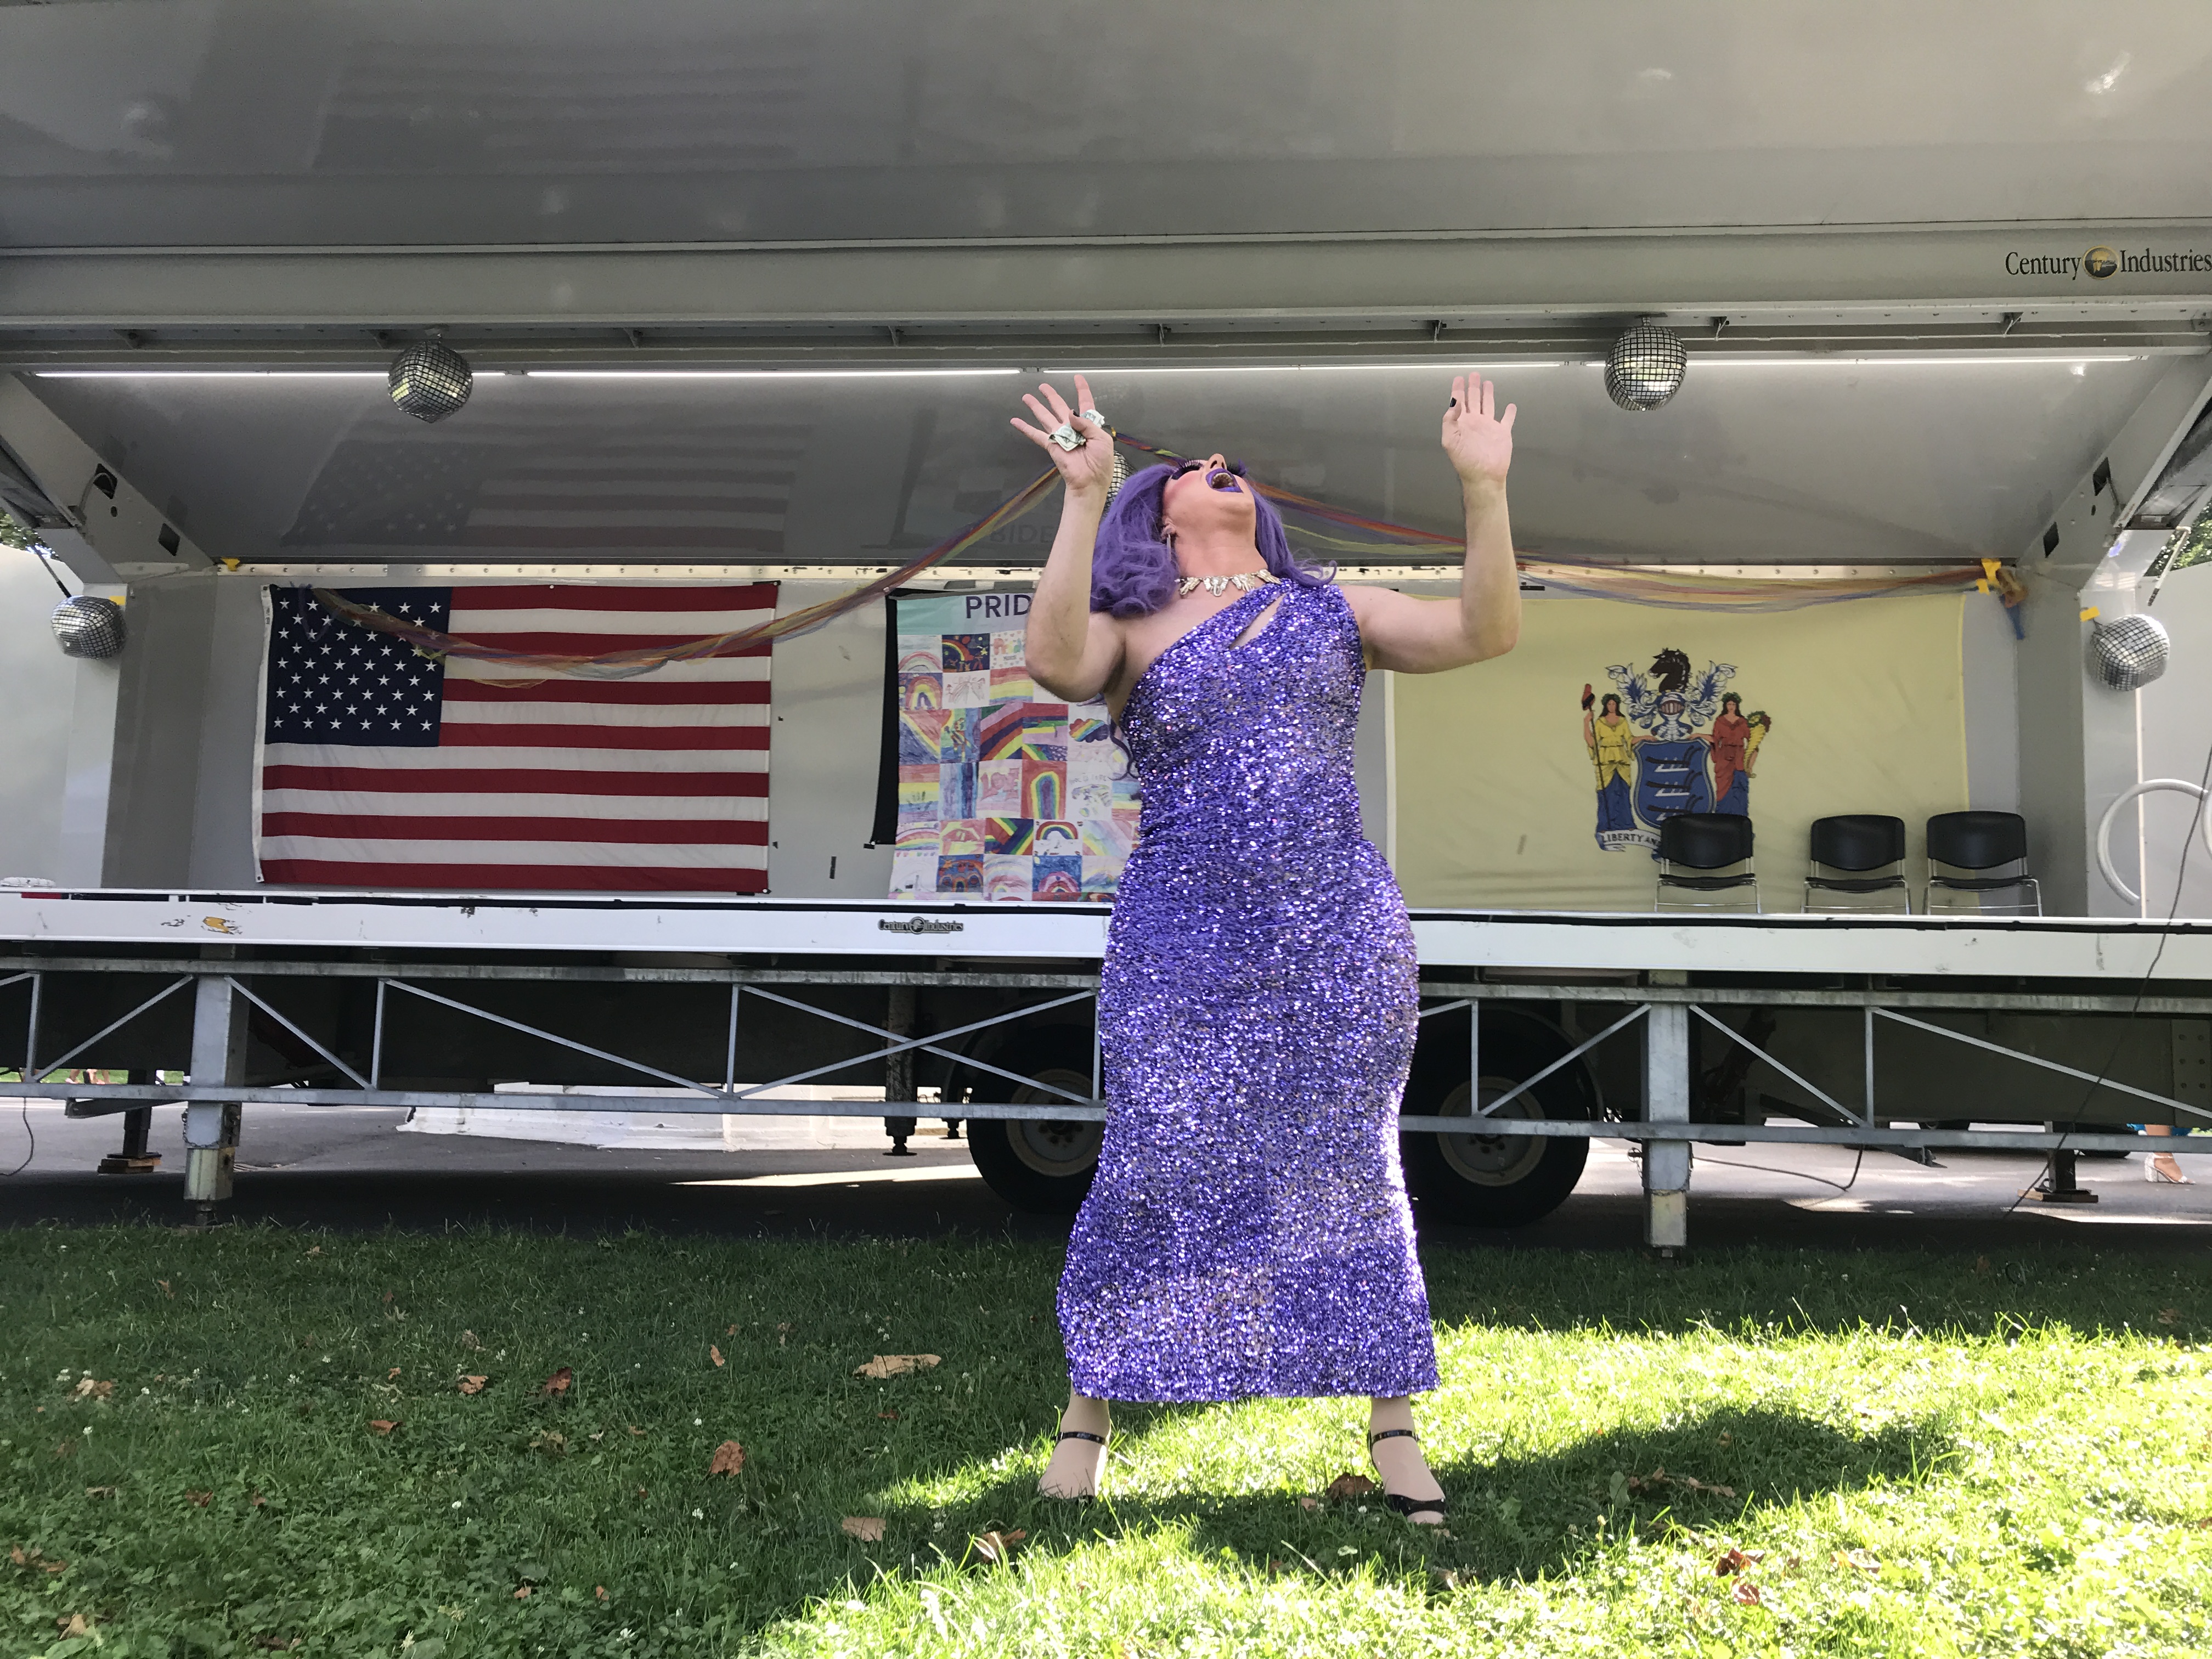 One of the drag show queens is wearing a sparkly purple dress and is dancing on the grass in front of the stage. Lincoln Park, Jersey City, New Jersey, United States of America